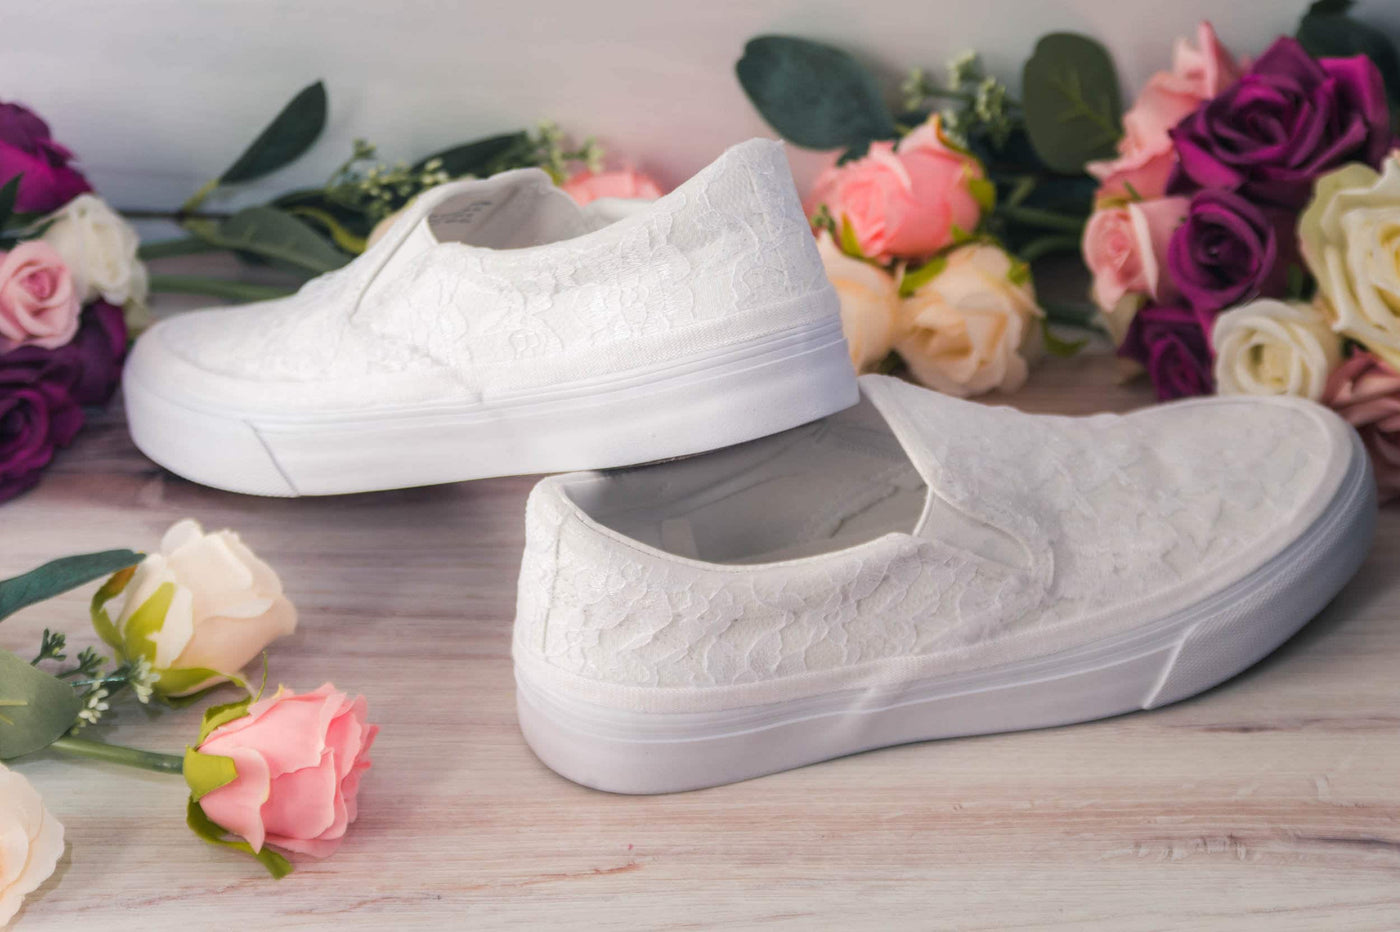 Wedding Sneakers for Bride, Comfy Bridal White Lace Slip On Sneakers for Brides, Bridesmaid Gift, Reception Shoes, Custom Shoes